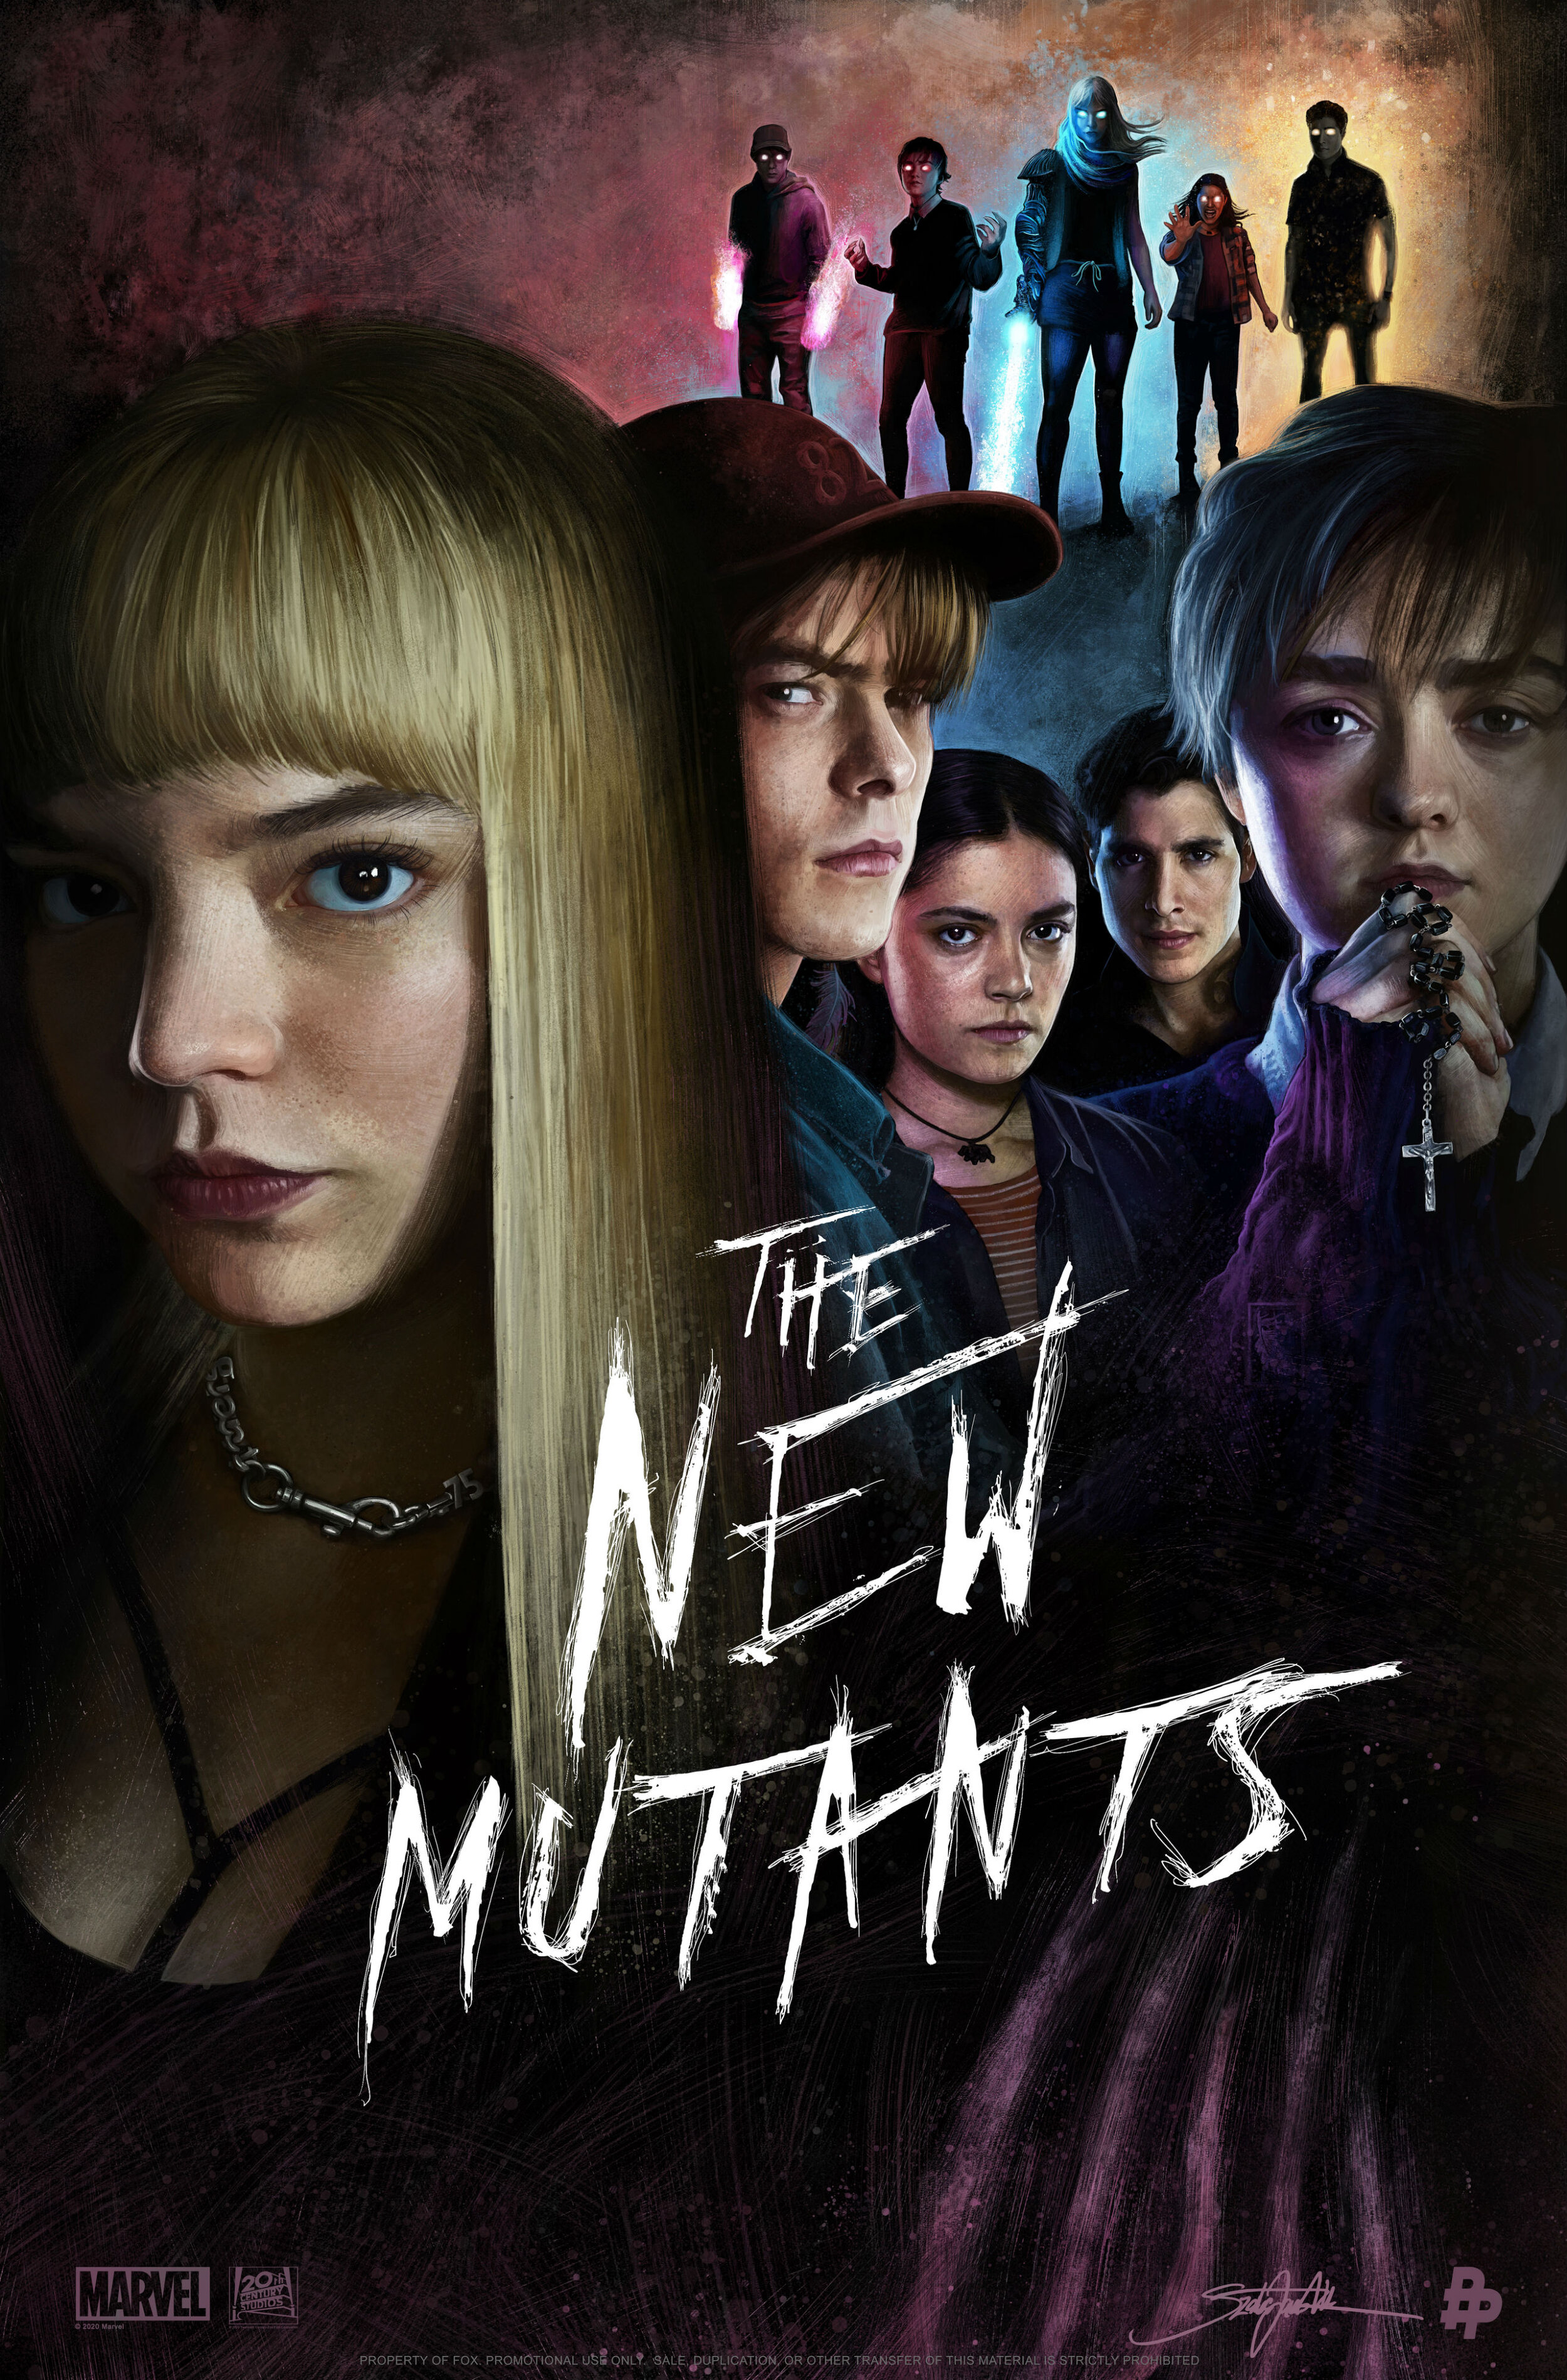 The New Mutants - Official Comic Con At Home Trailer